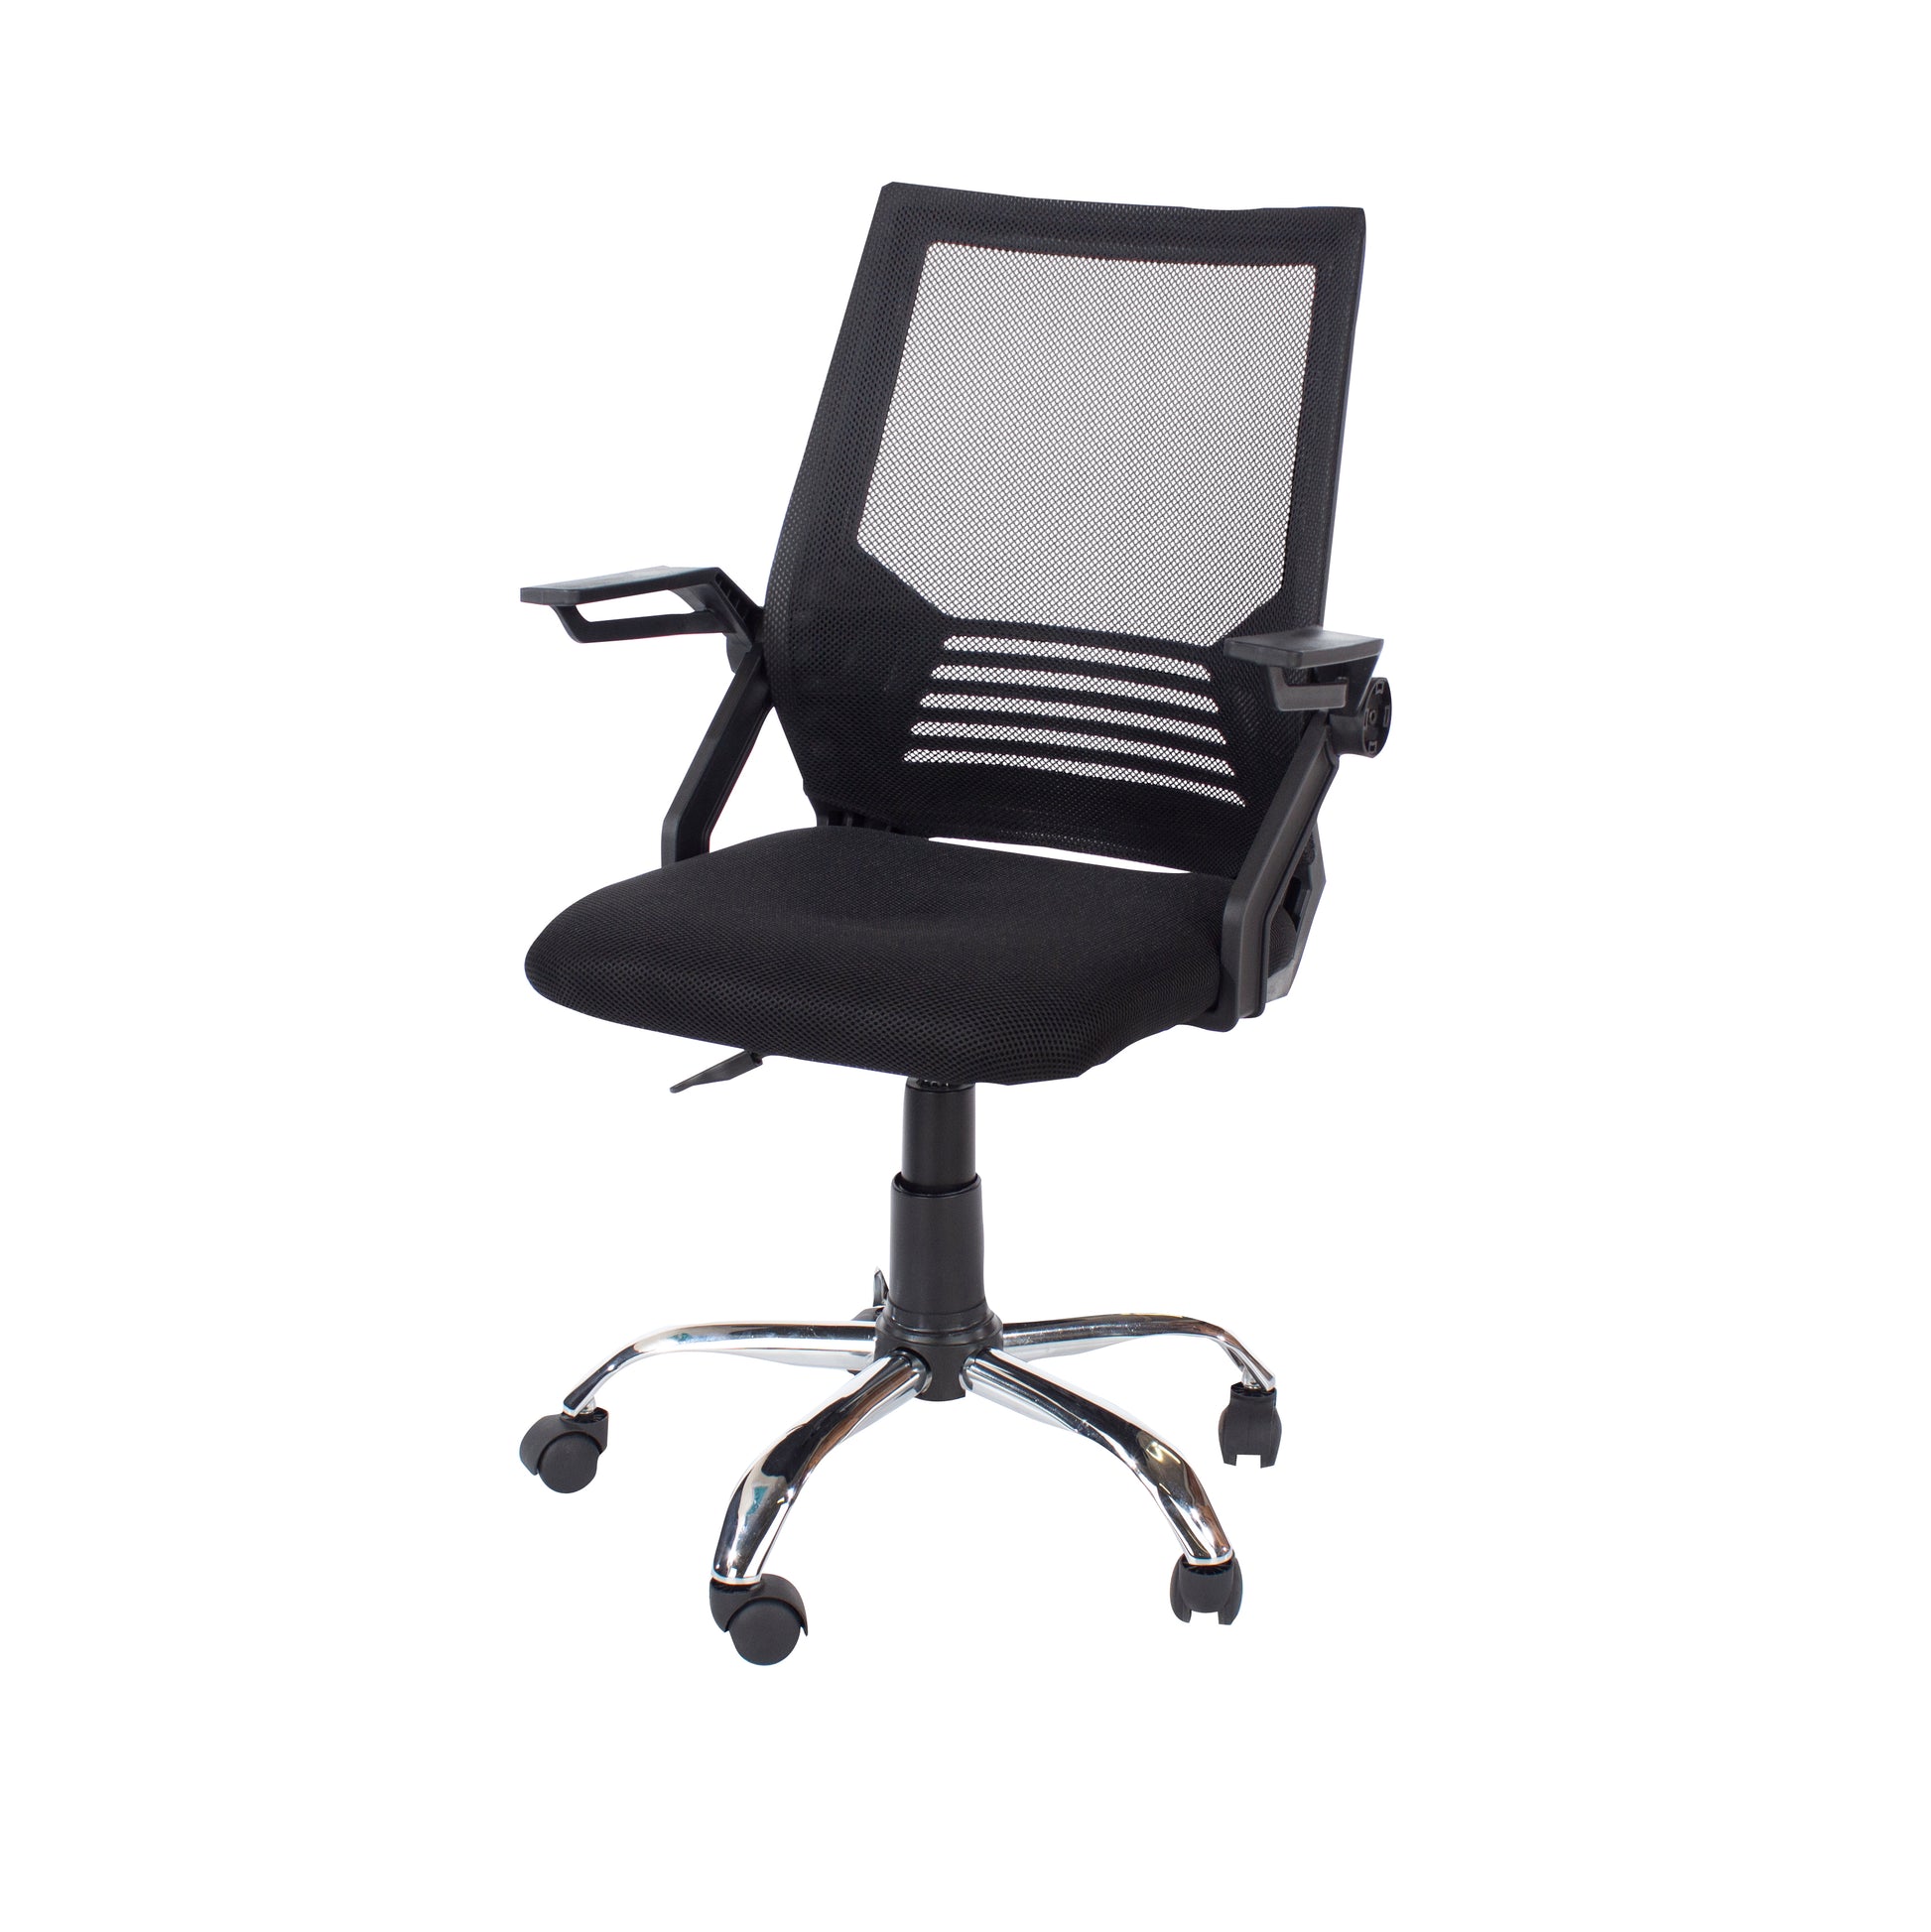 Contemporary study chair with Chrome base